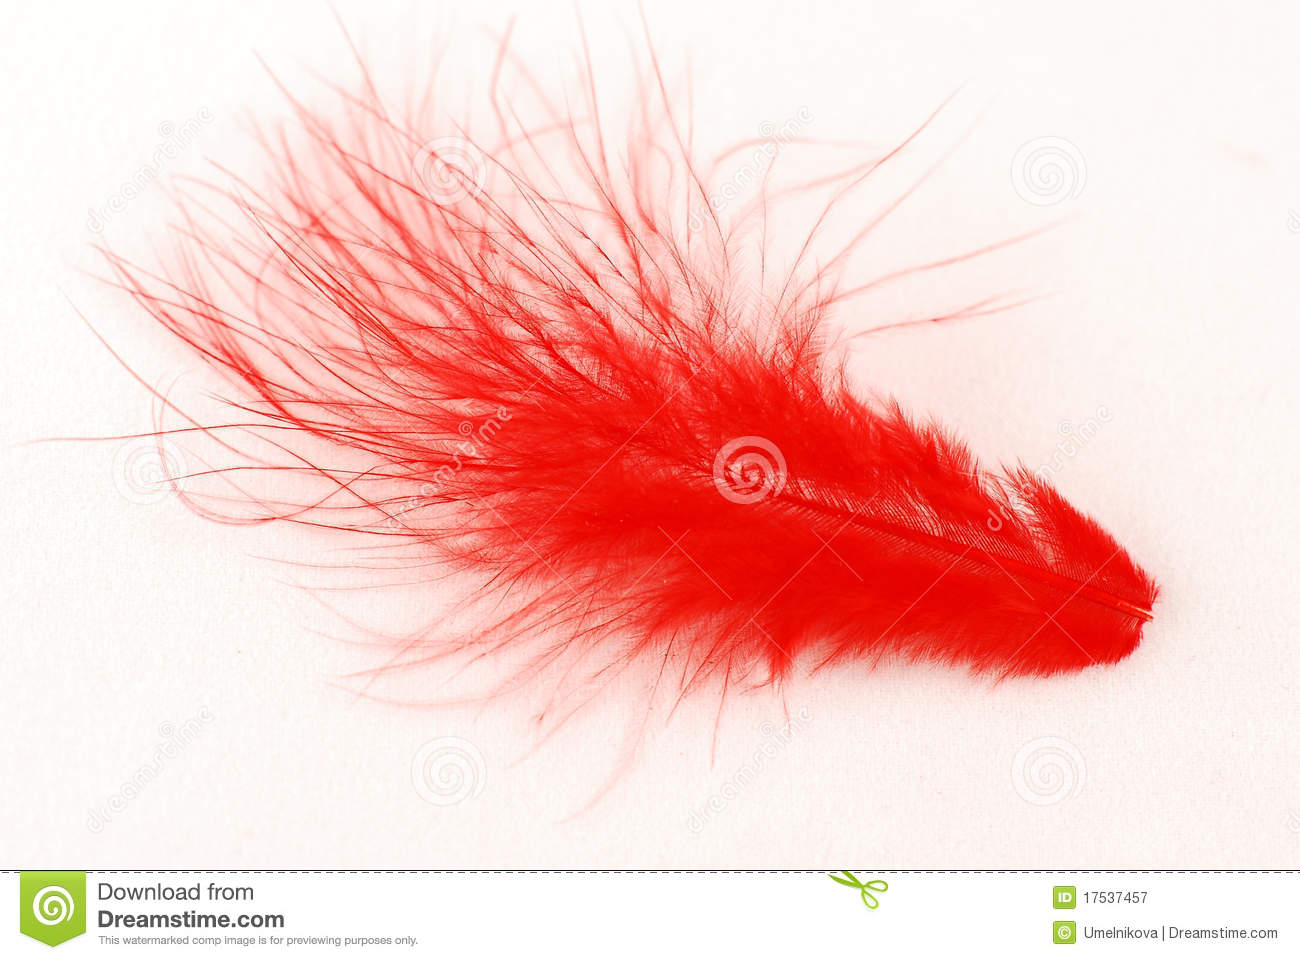 Red Feather Royalty Free Stock Photography   Image  17537457